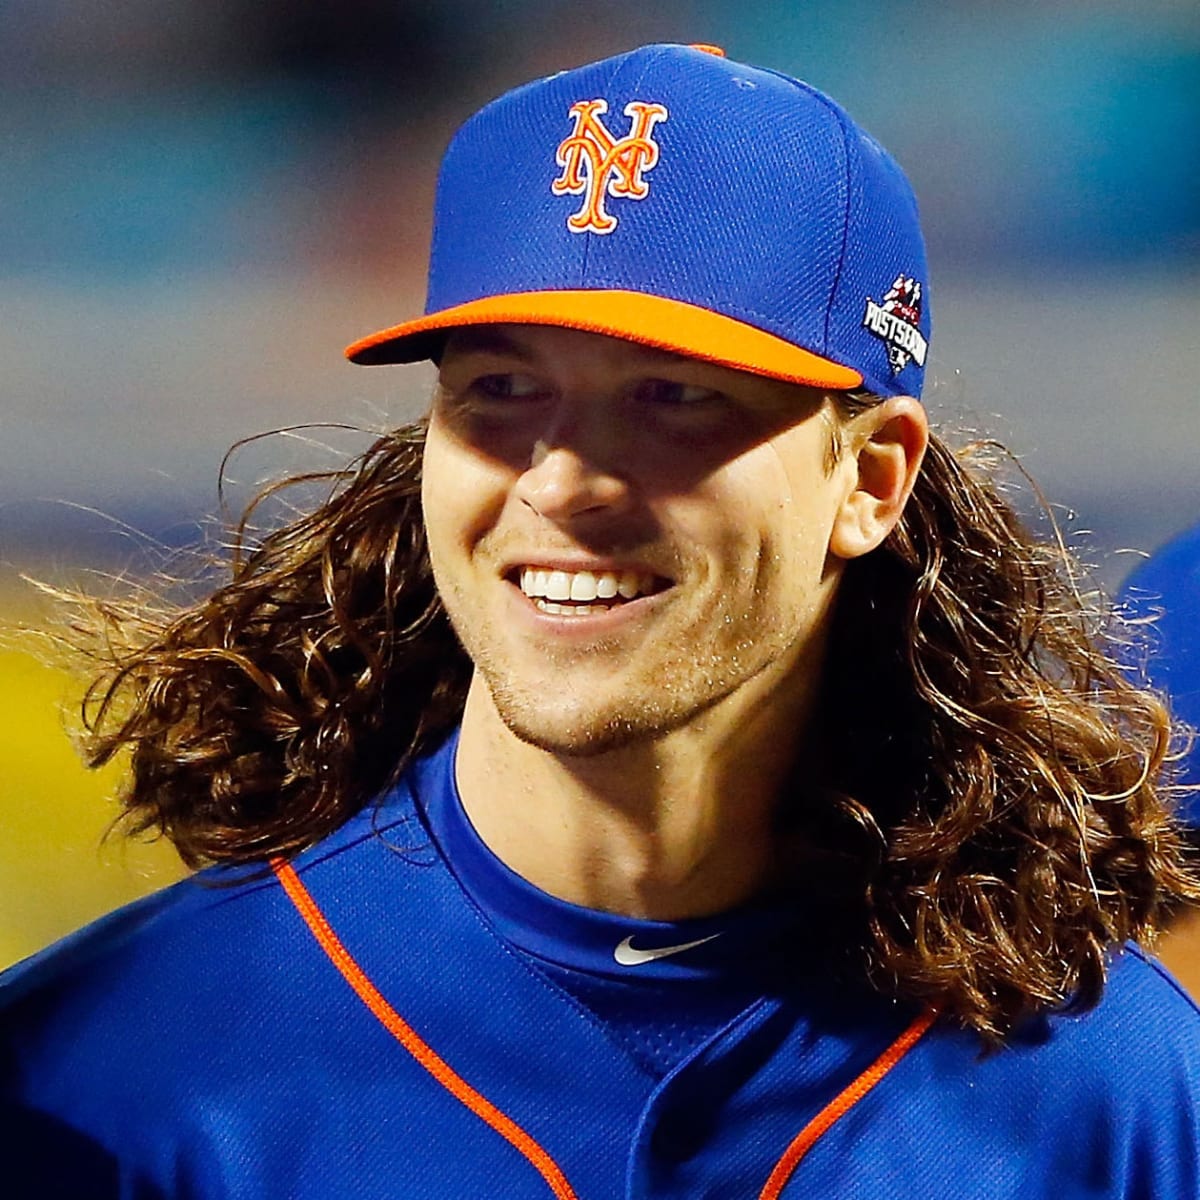 Jacob deGrom: World Series Mets SP cutting long hair after season